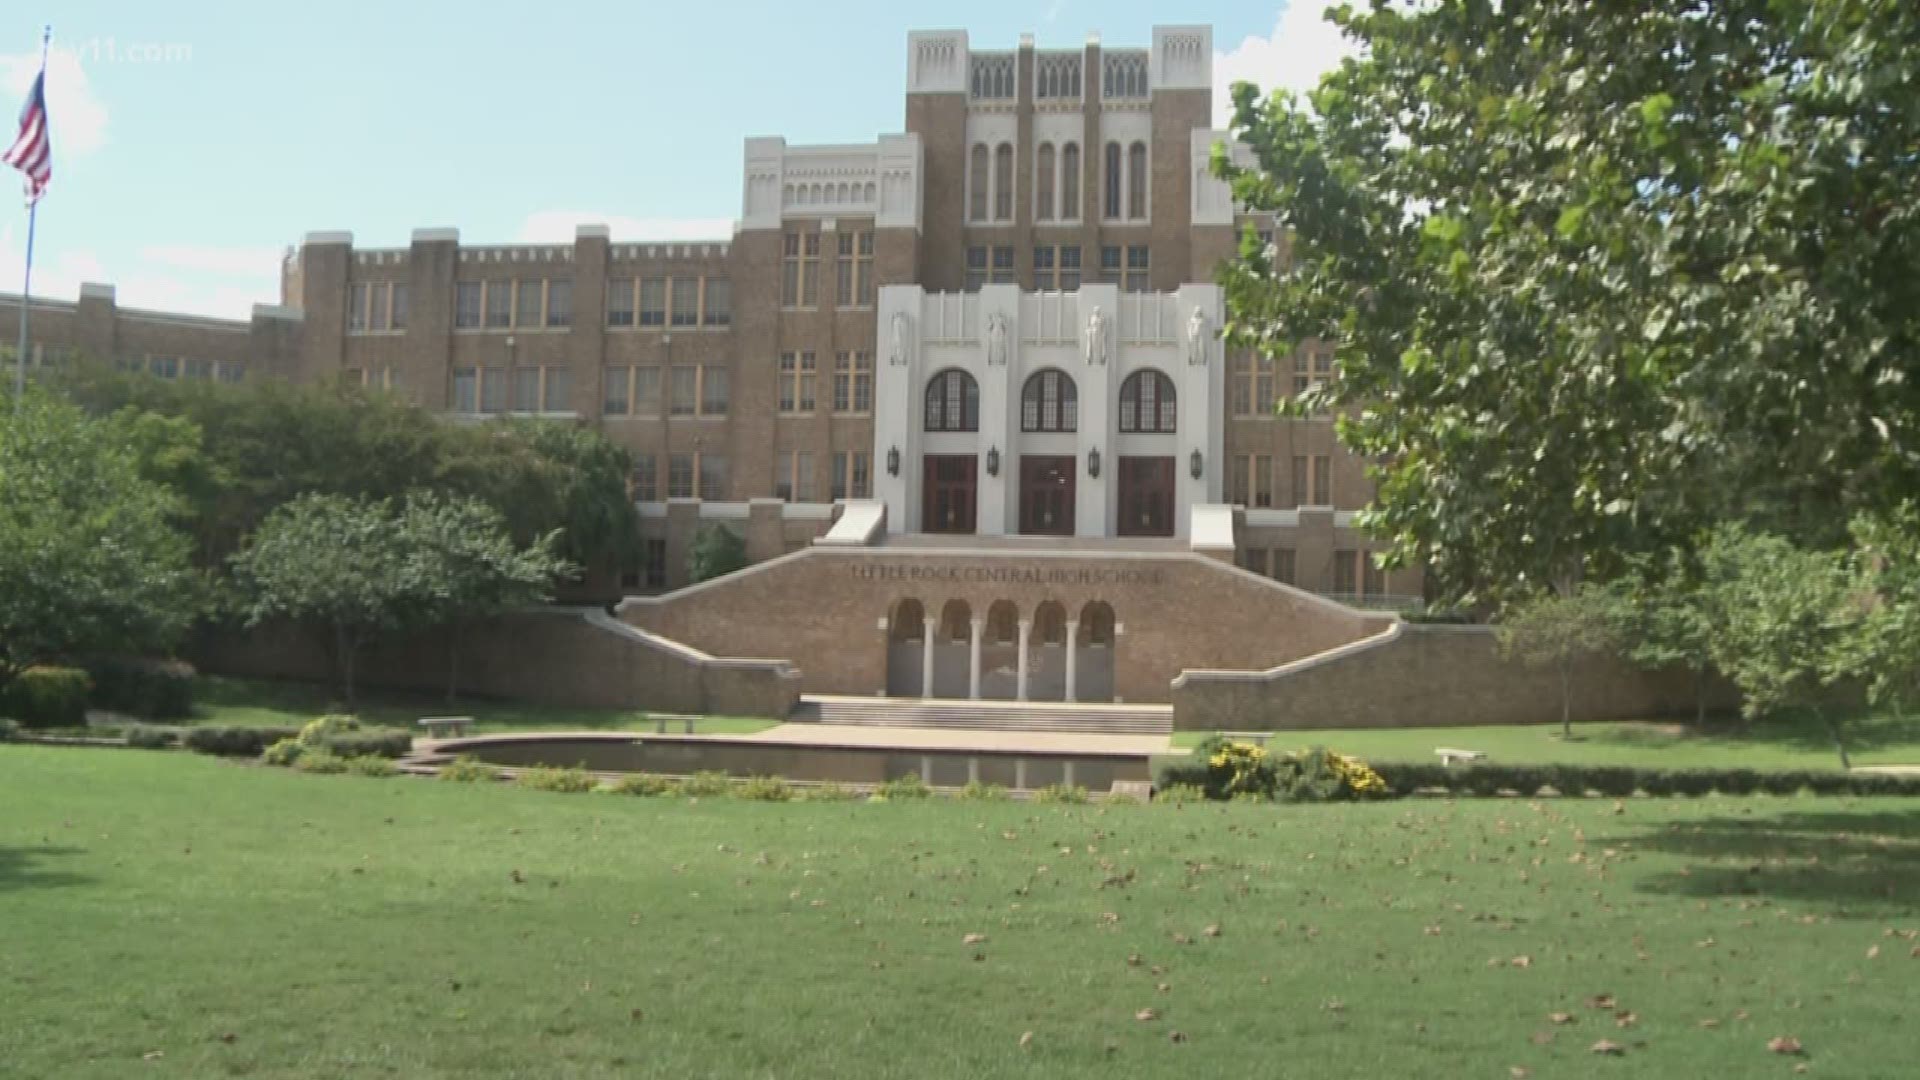 Today marks a special day in history. On this day 61 years ago, nine brave, black students finished their first full day at Little Rock Central High.